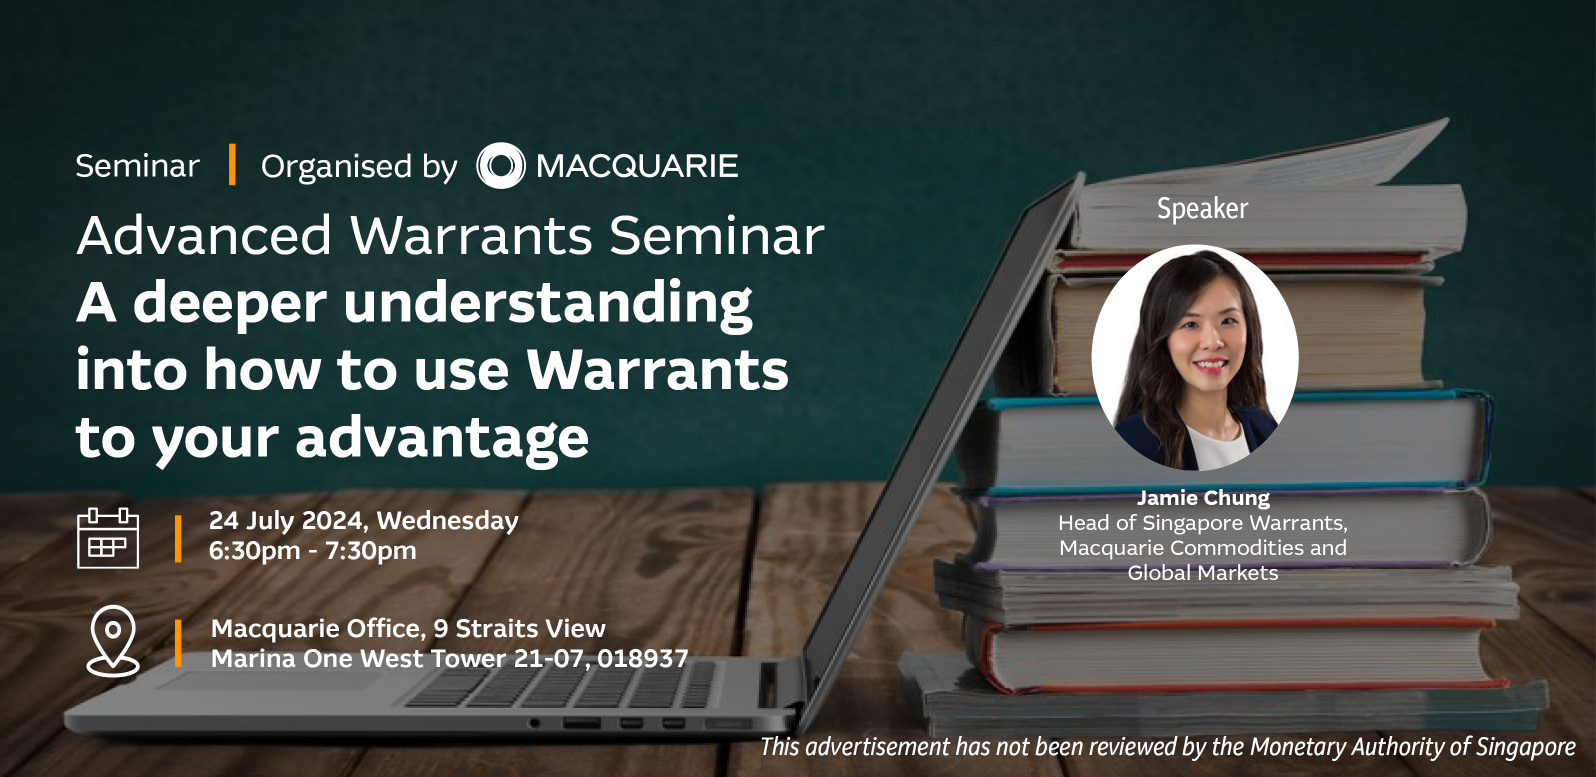 📣 Reminder to sign up on today's advanced Warrant Seminar!